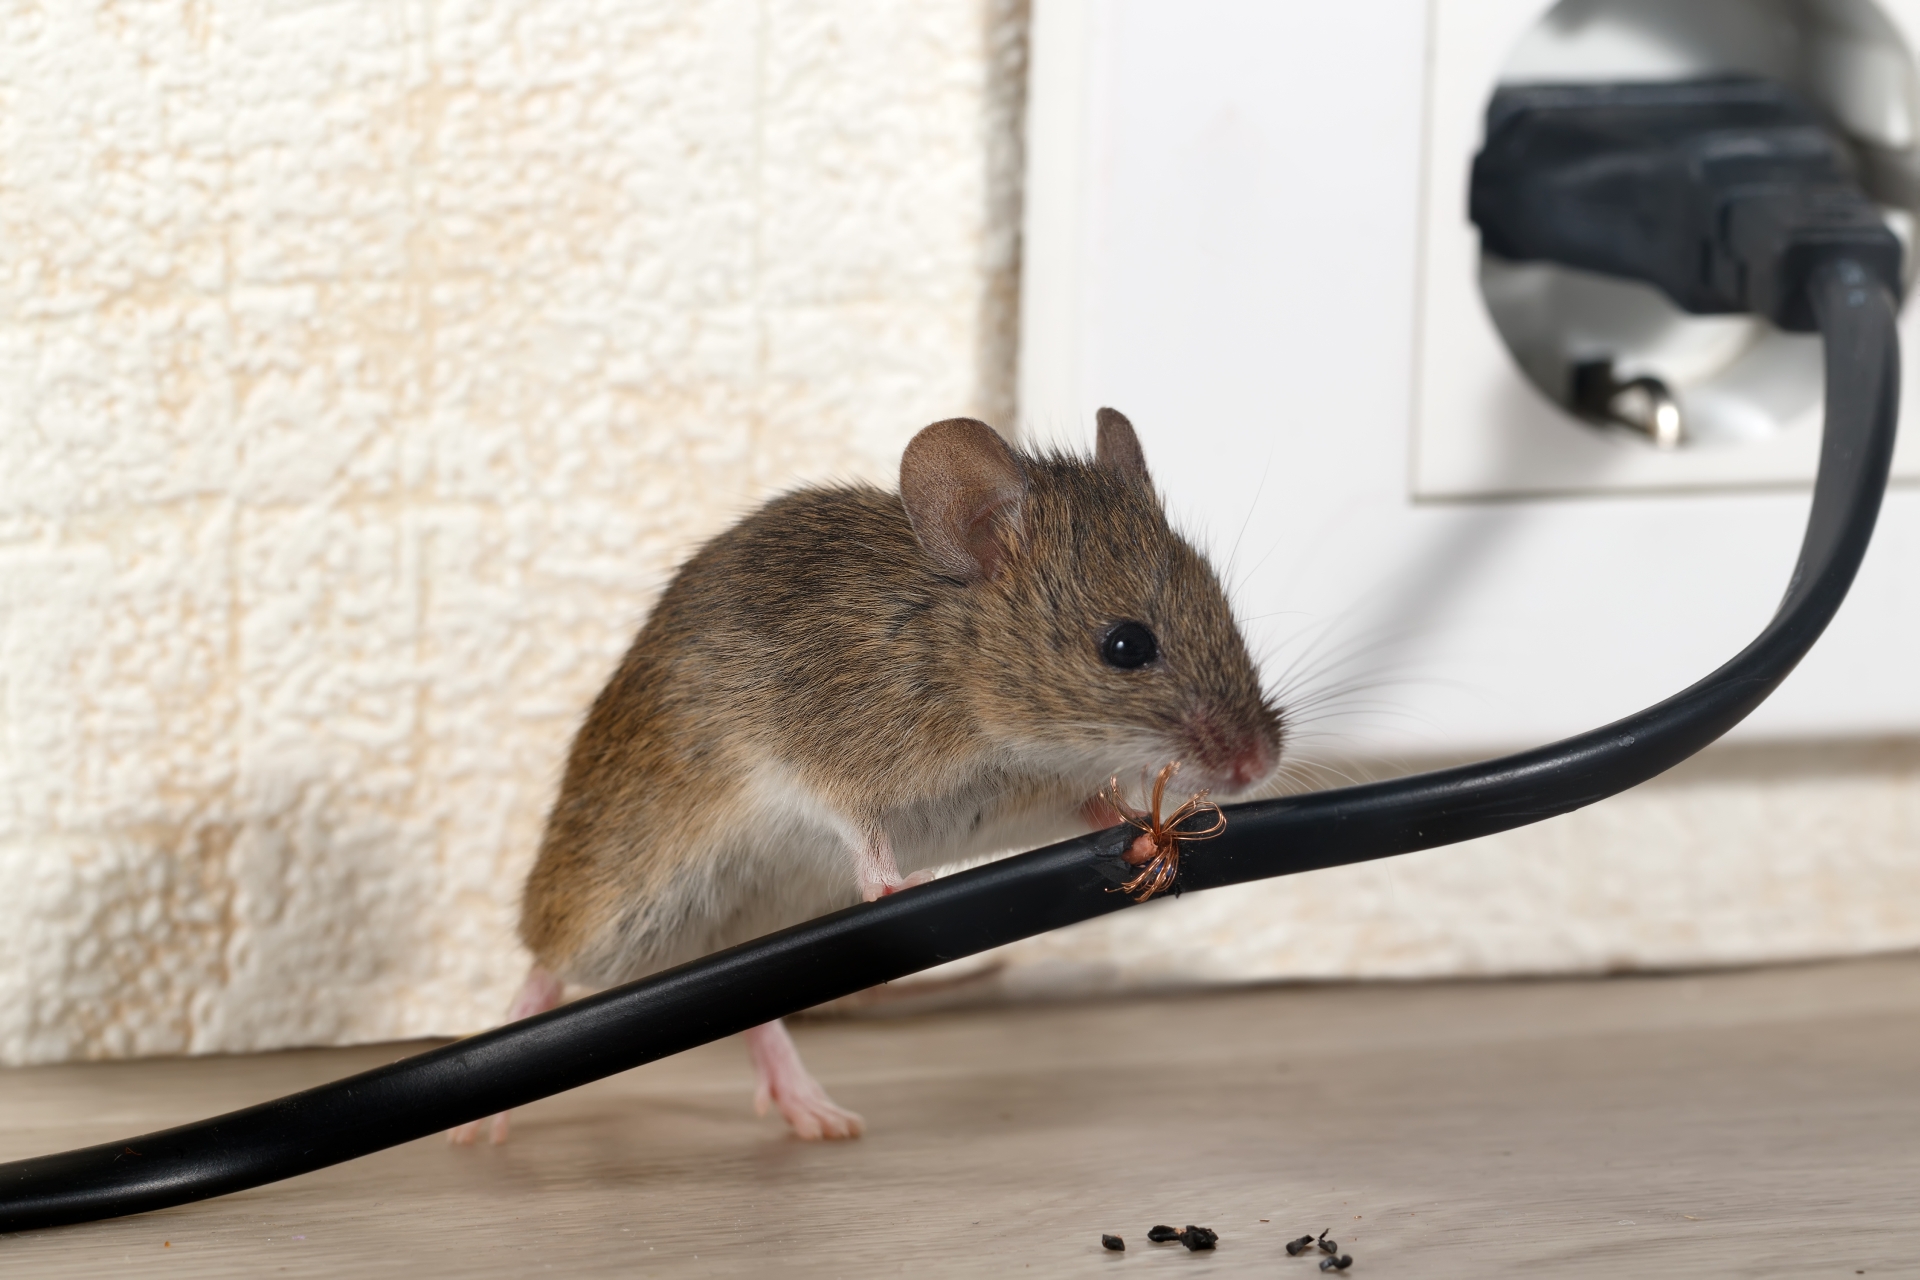 Mice Infestation, Pest Control in Radlett, Shenley, WD7. Call Now 020 8166 9746